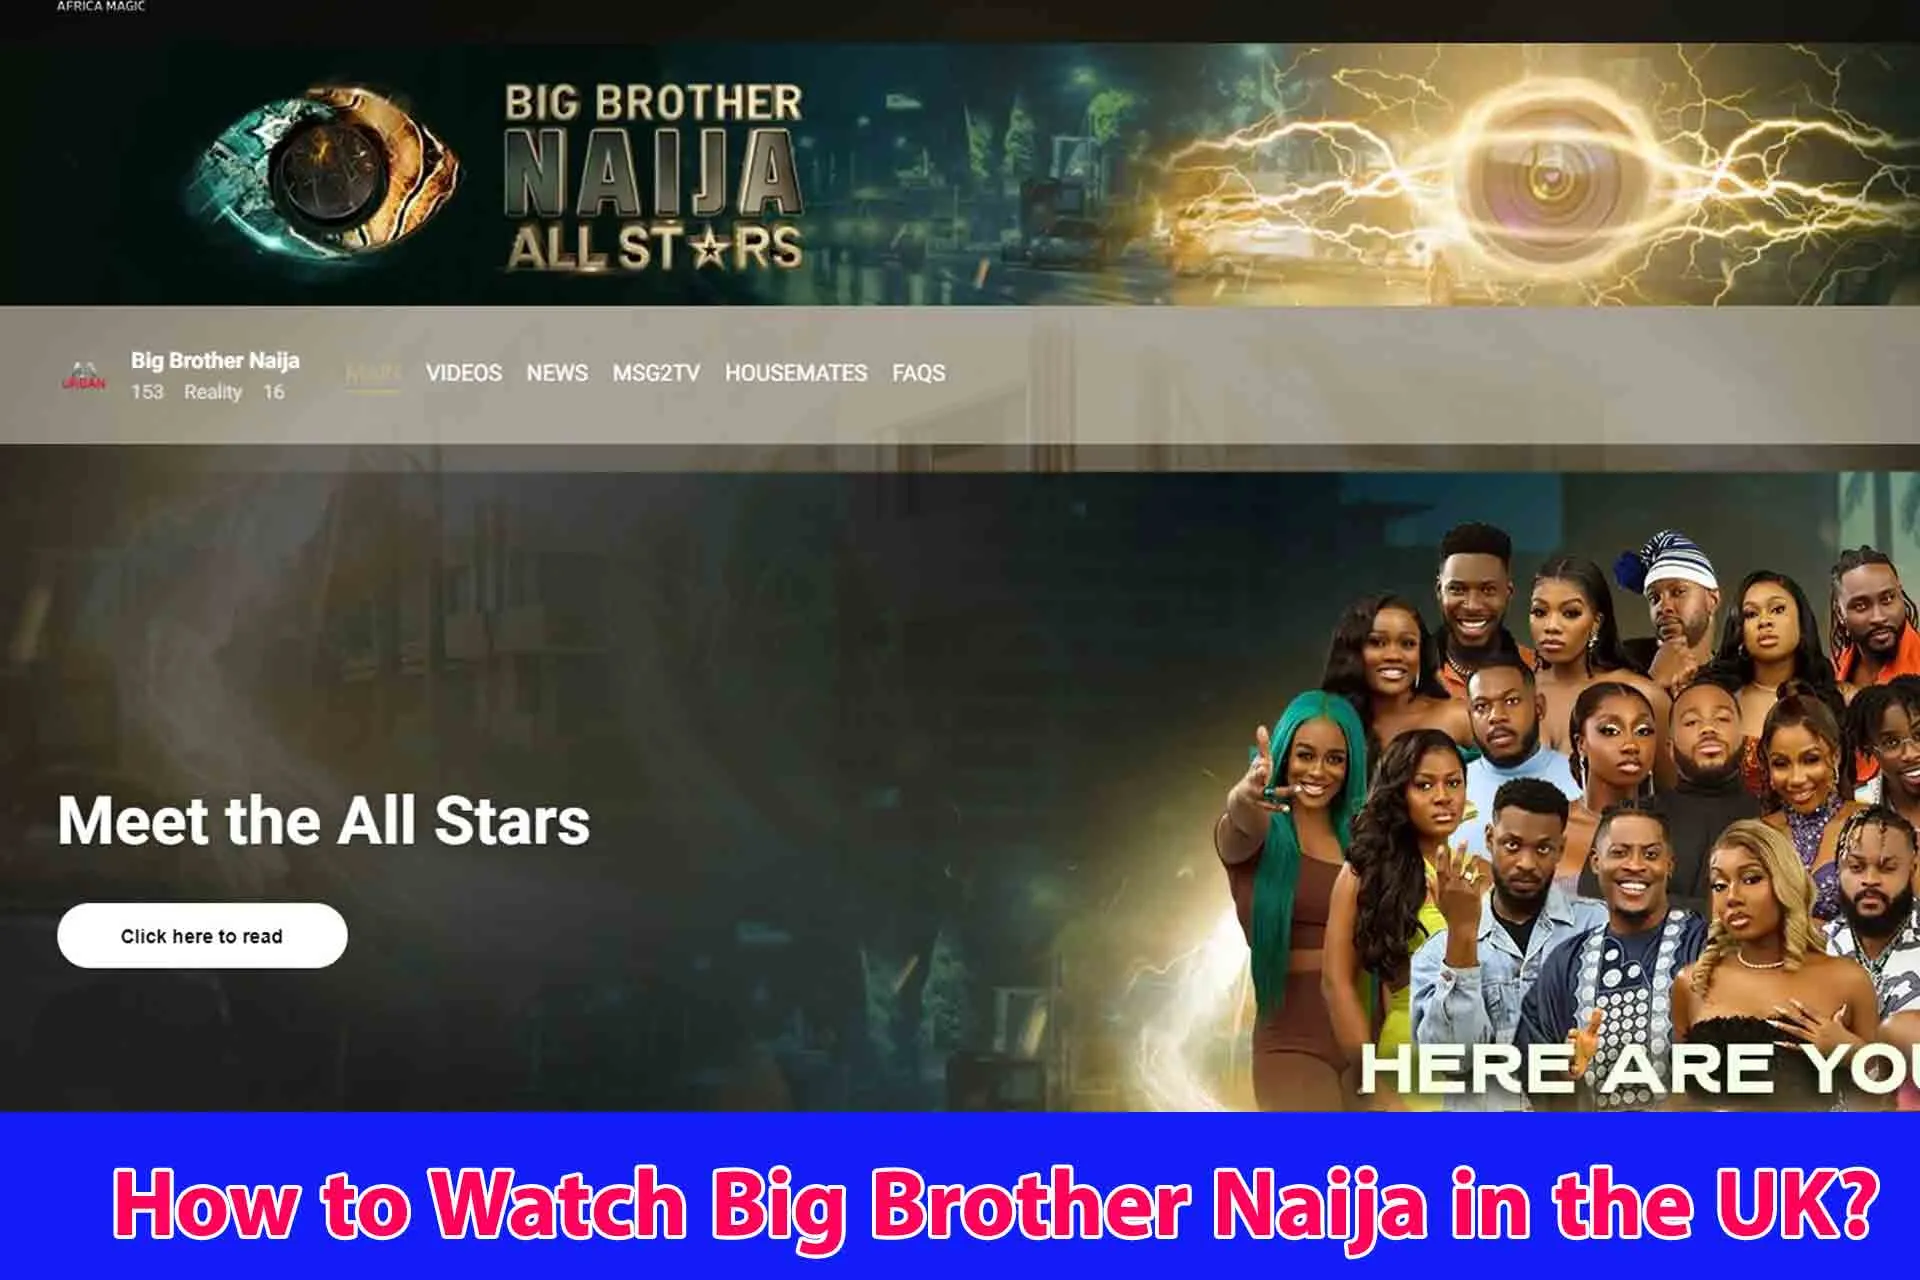 How to watch Big Brother Naija in UK